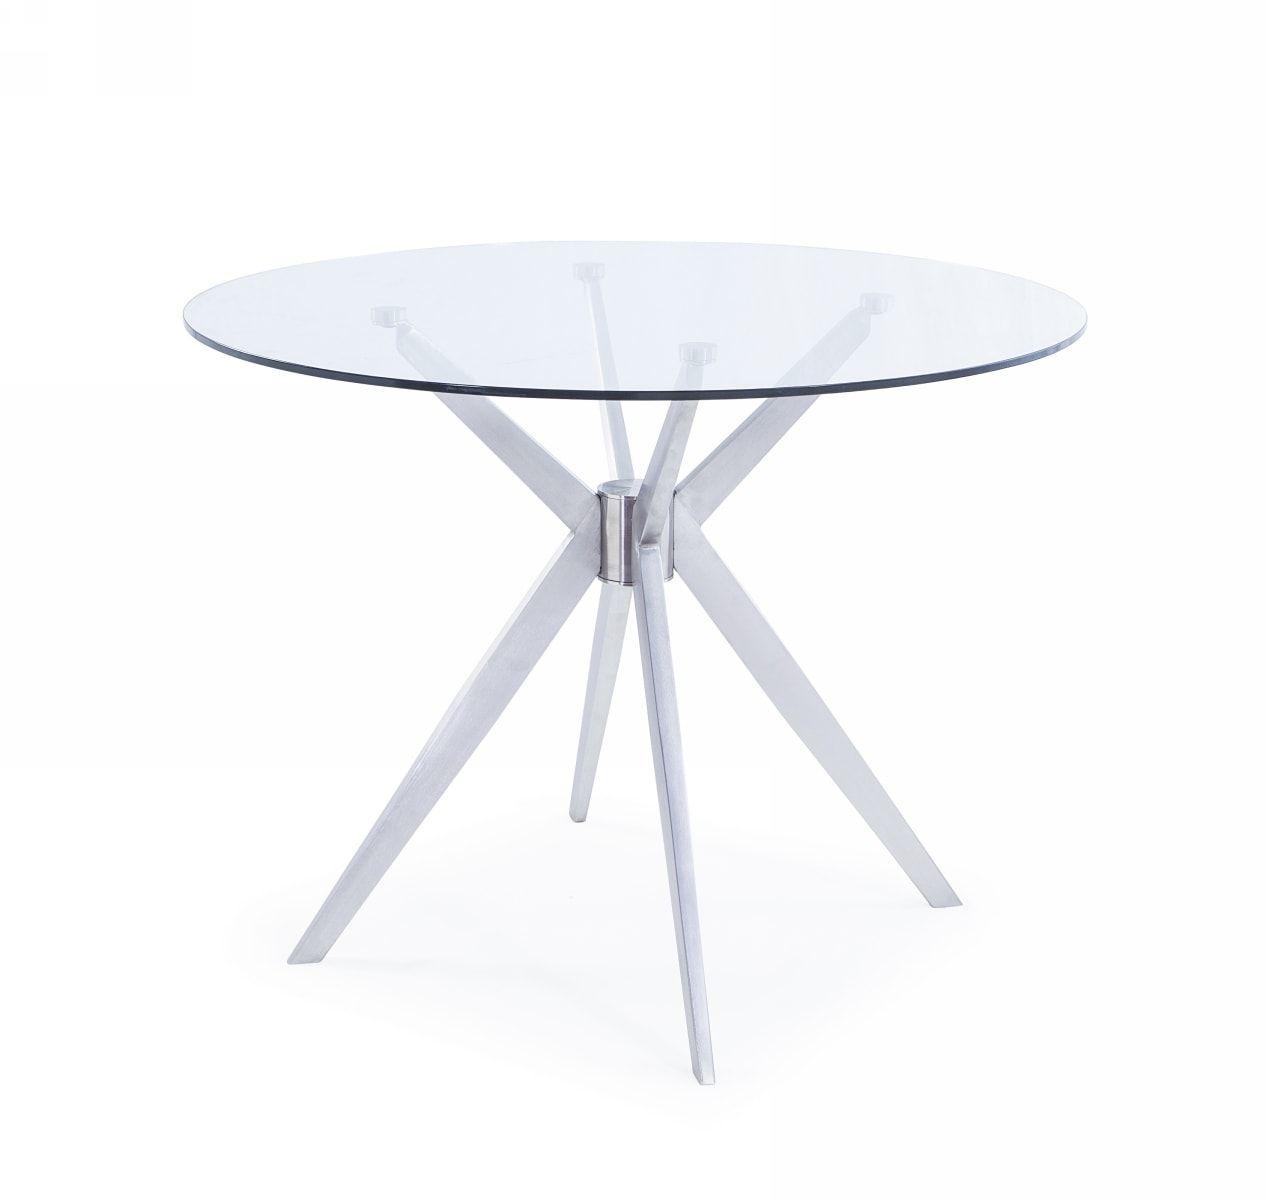 Contemporary, Modern Dining Table Dallas VGHR7038-BSS in Silver 